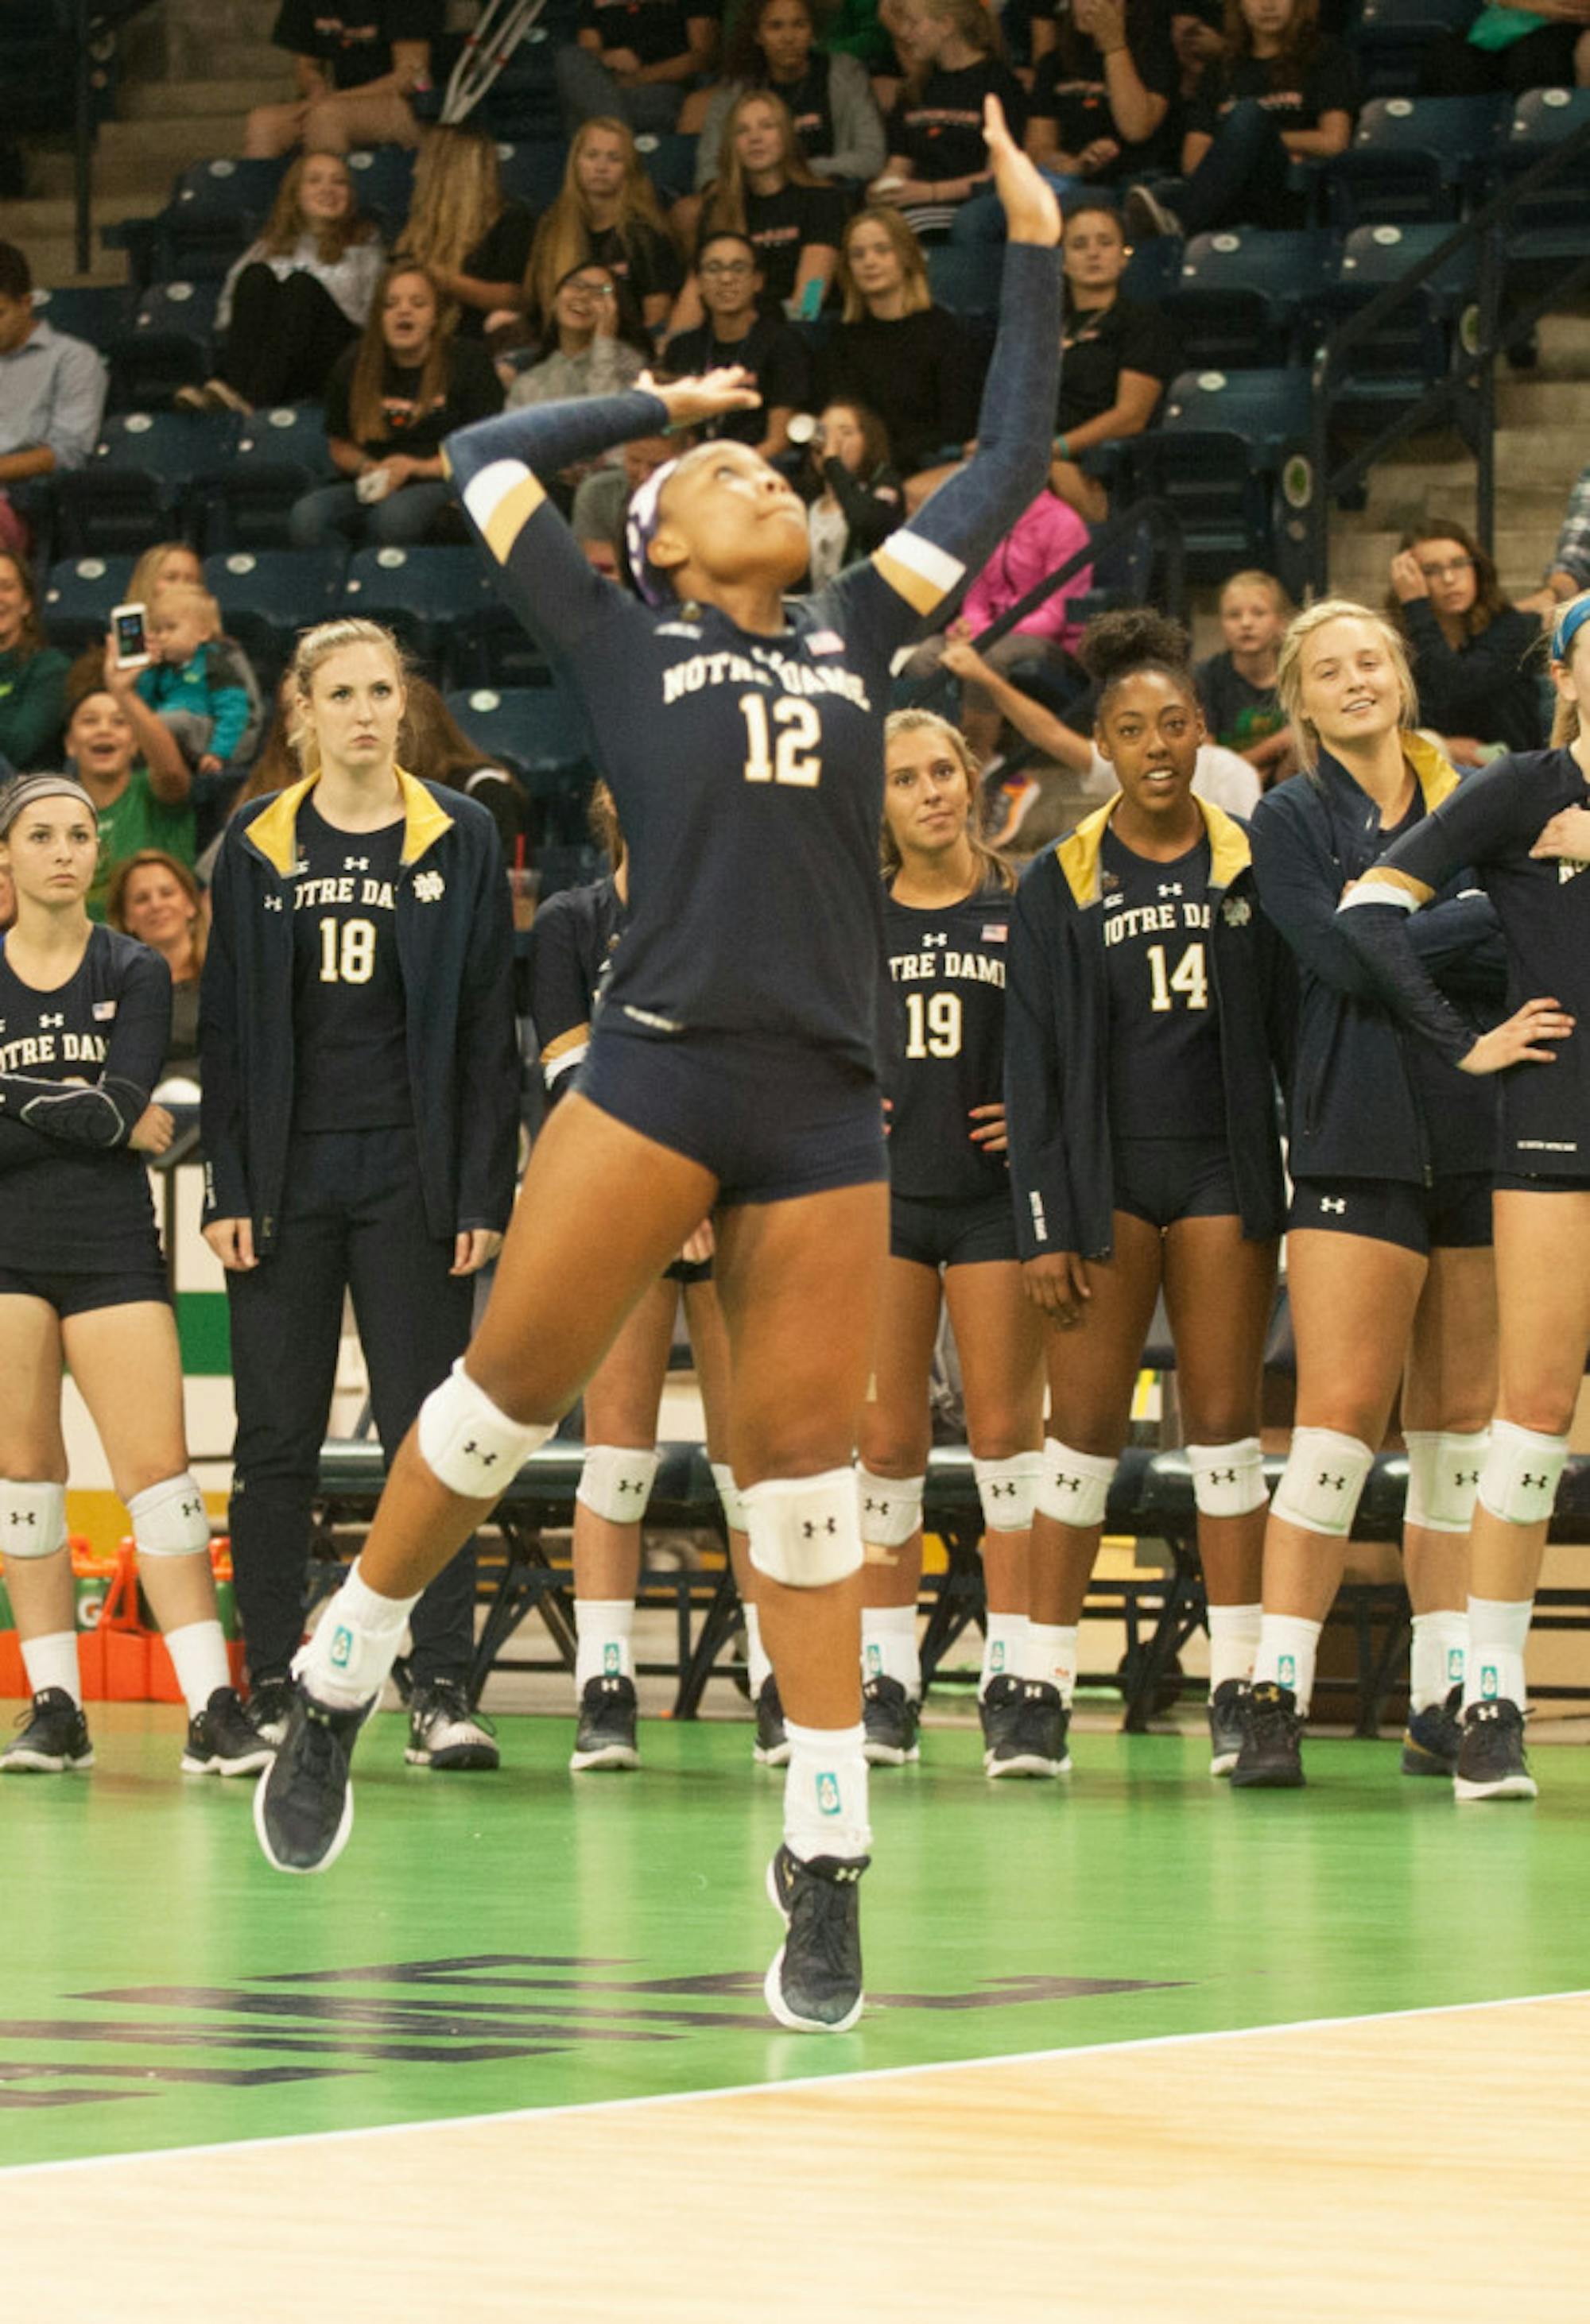 Irish sophomore outside hitter Jemma Yeadon serves the ball during Notre Dame's 3-1 win over Valparaiso on Aug. 25 at Compton Family Ice Arena.